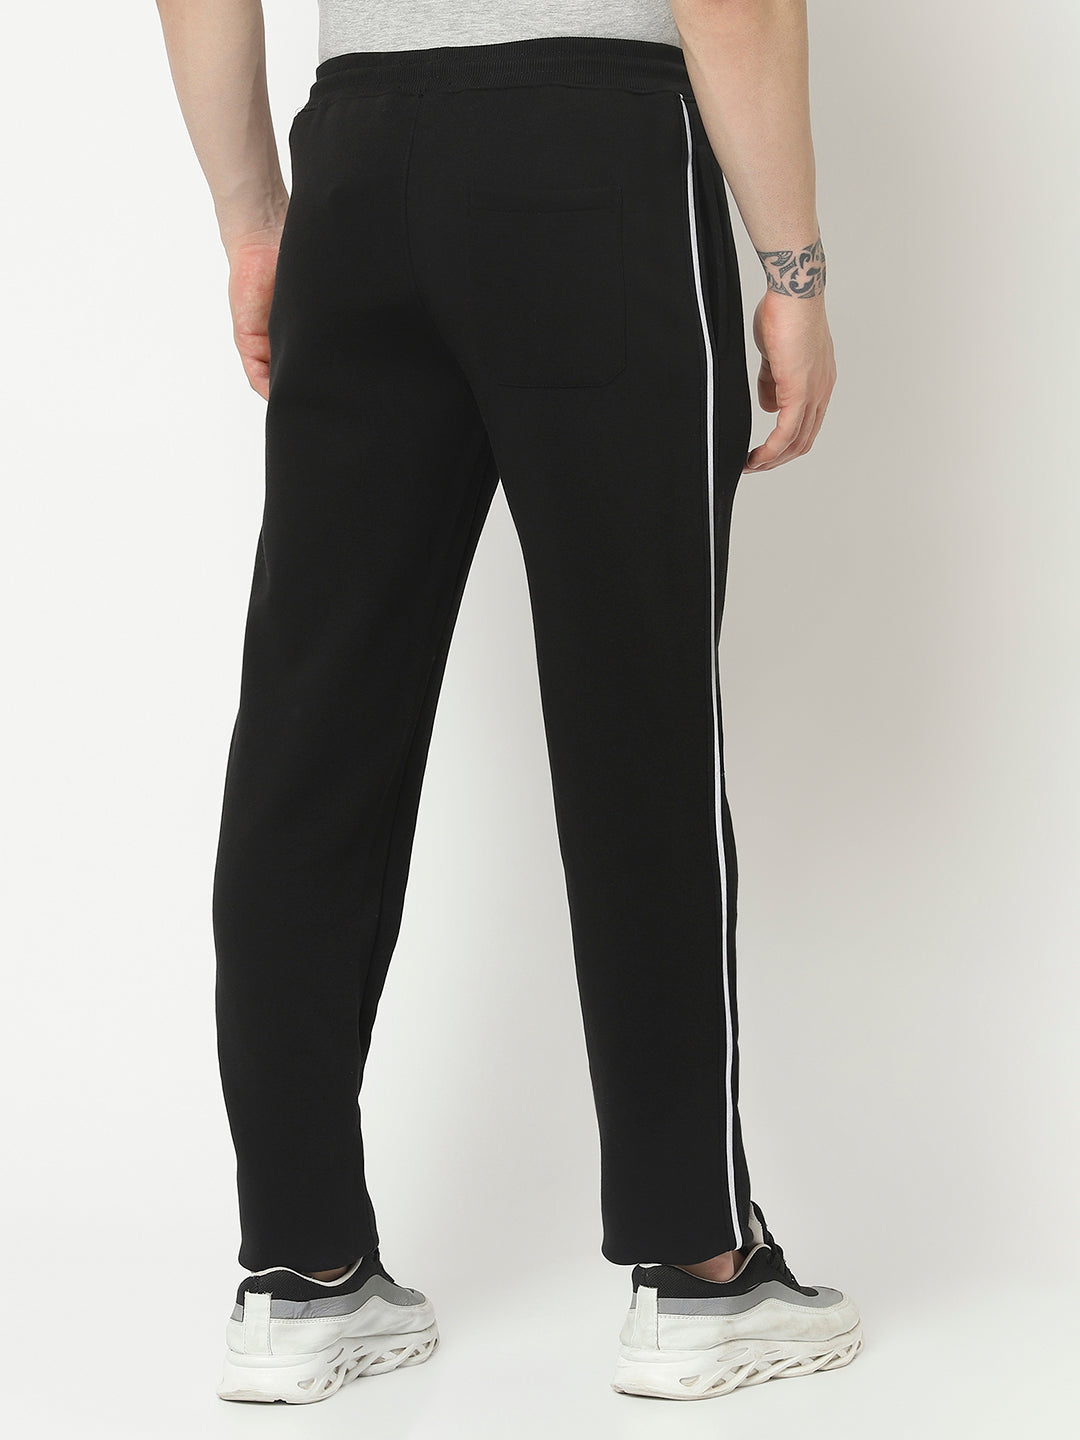  Black Track Pant with Contrast Logo Work